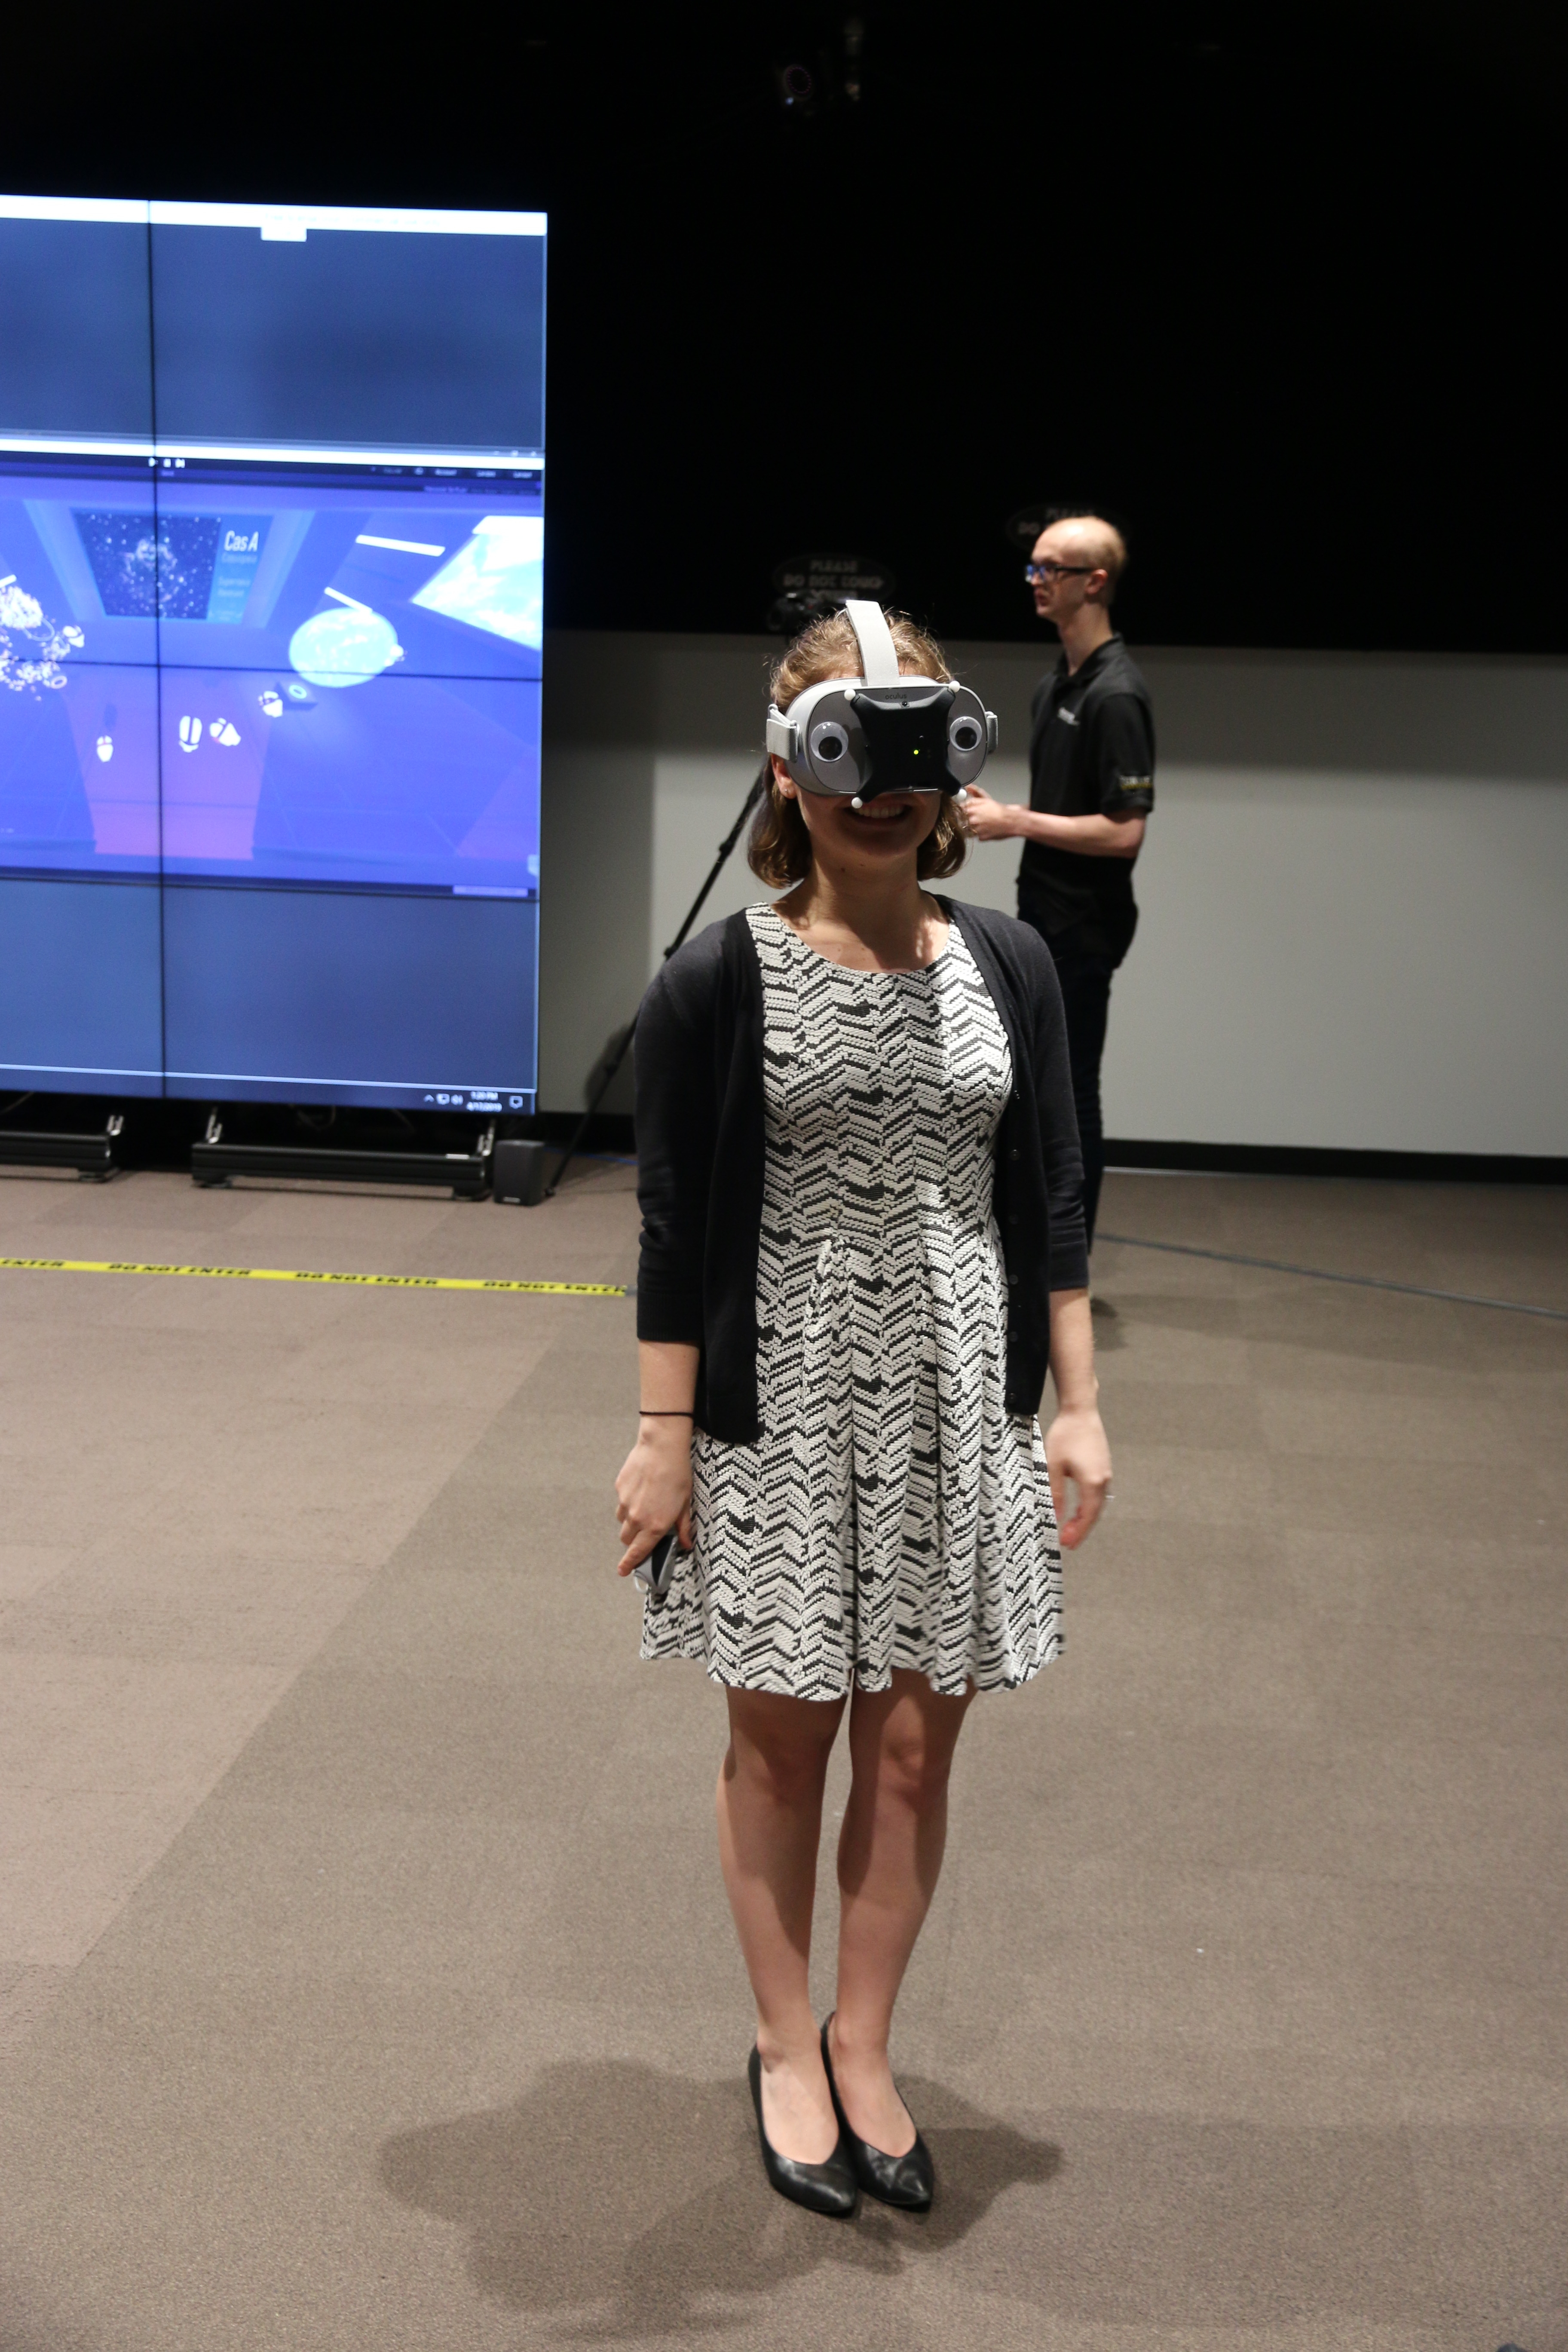 A user trying out the new collaborative virtual reality environment, The Forget